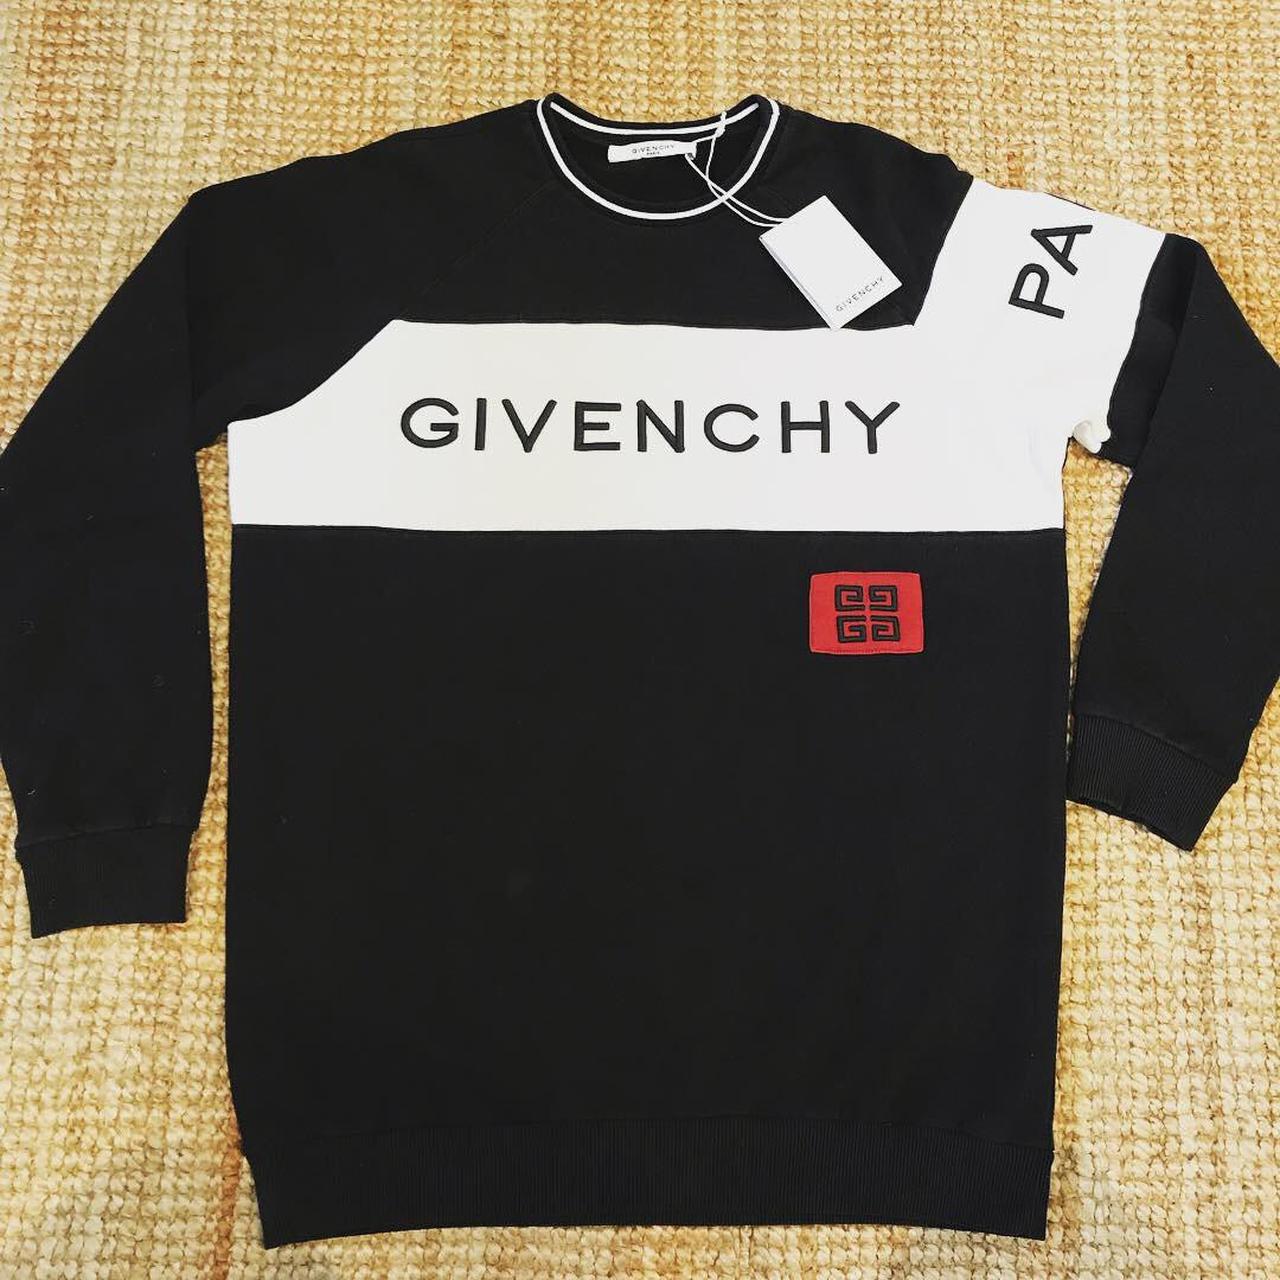 Givenchy 4G Paris Embroidered Sweatshirt, Brand new